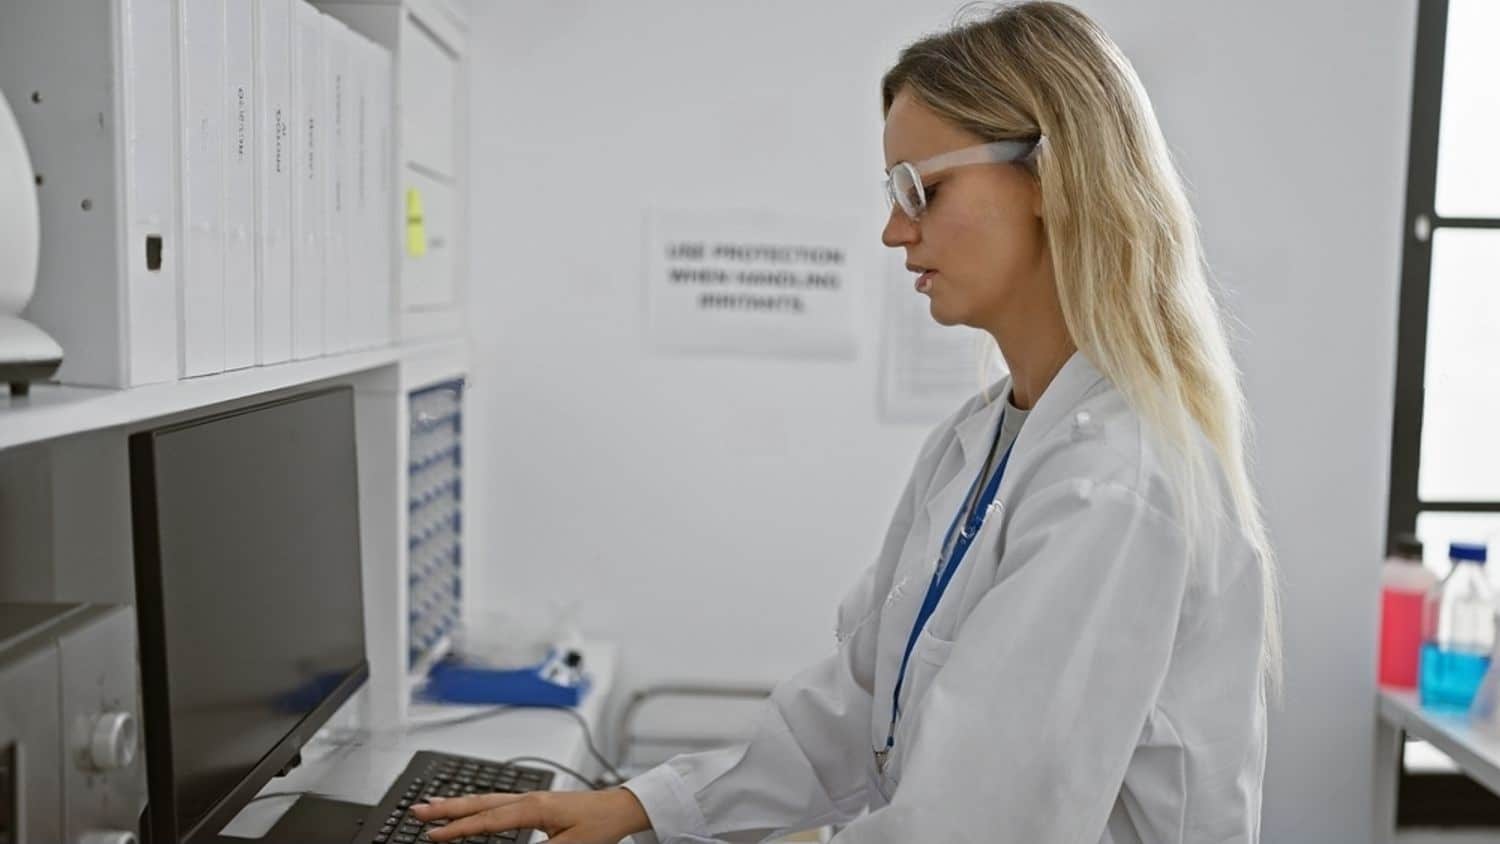 stock-photo-a-focused-blonde-woman-wearing-safety-glasses-works-on-a-computer-in-a-laboratory-setting-2458952993-transformed